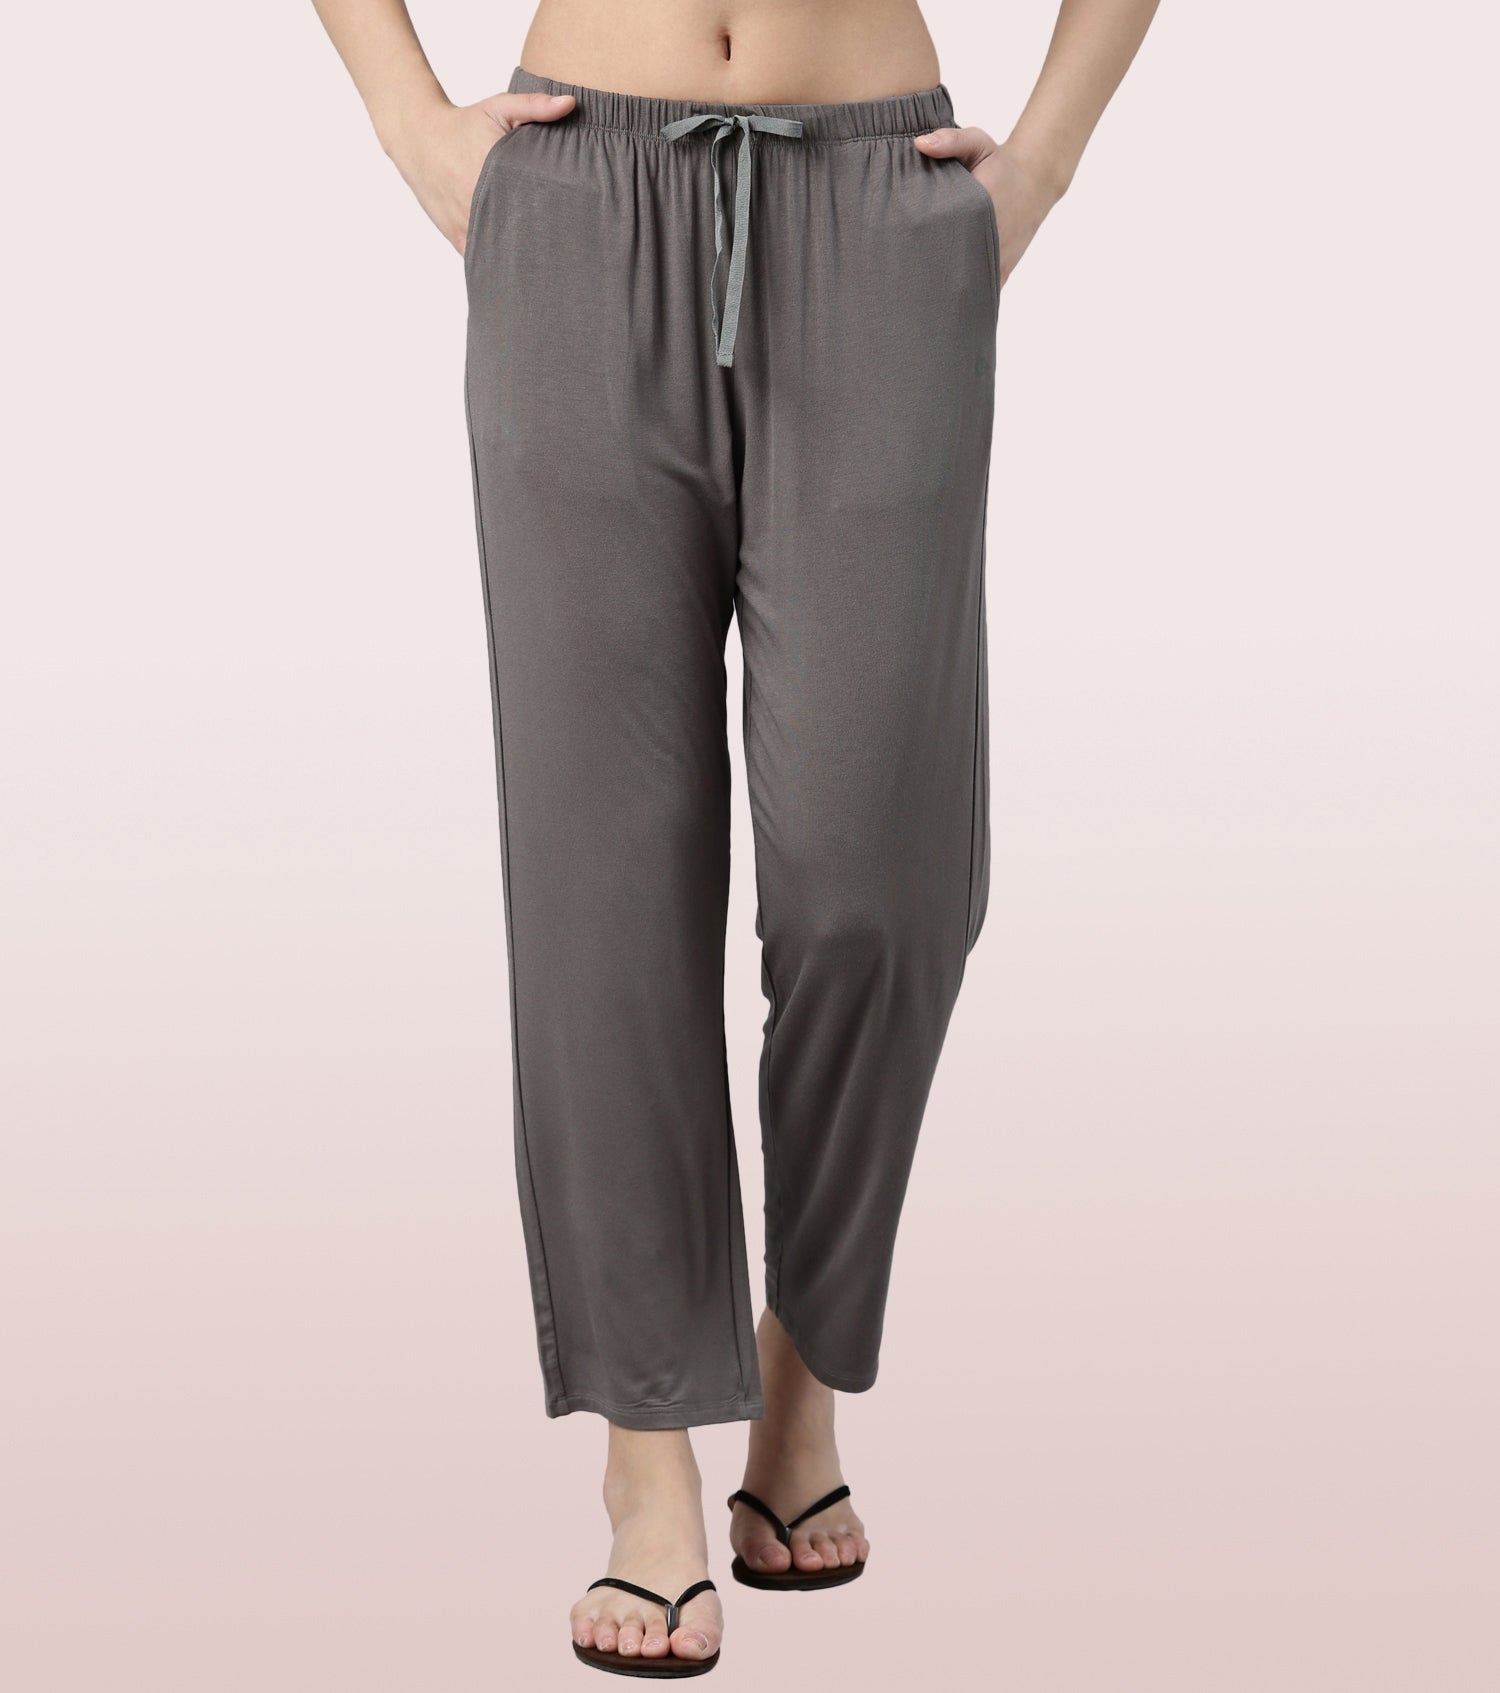 Essentials – E404
BASIC HOME PANT | VISCOSE SPANDES SOLID PULL-ON PANT
RELAXED FIT | MID RISE | REGULAR LENGTH